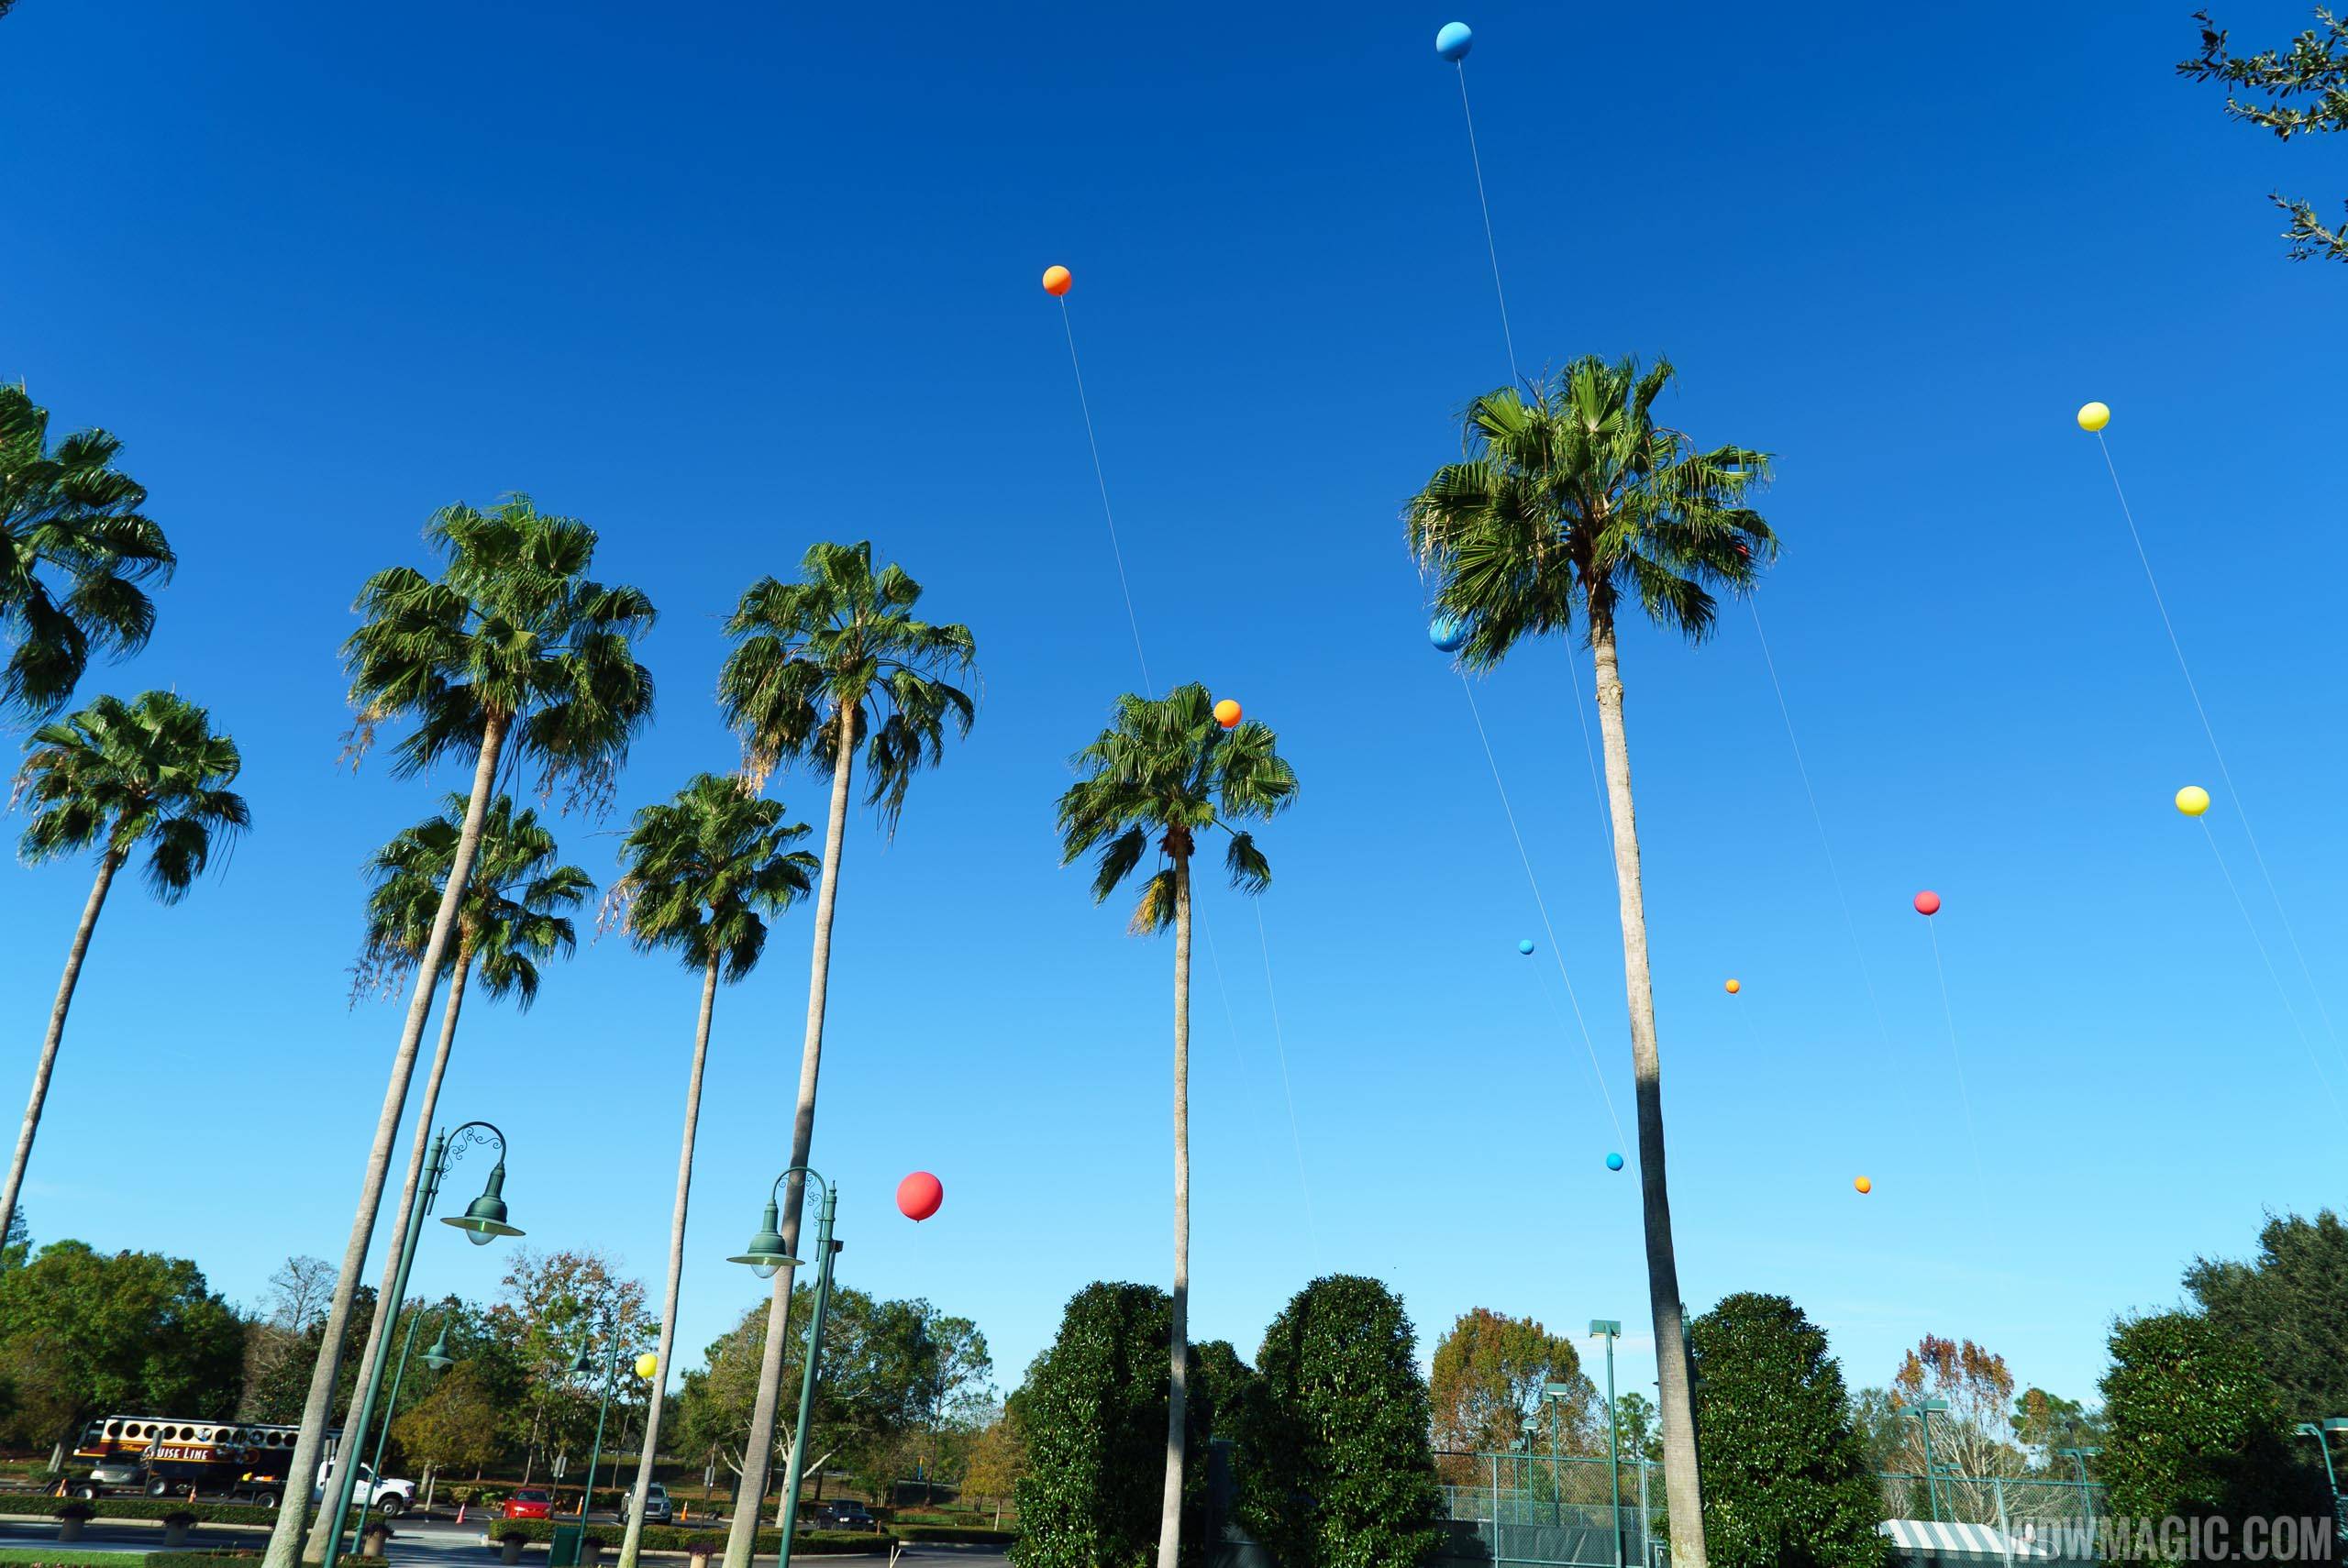 Height test balloons over parking lot